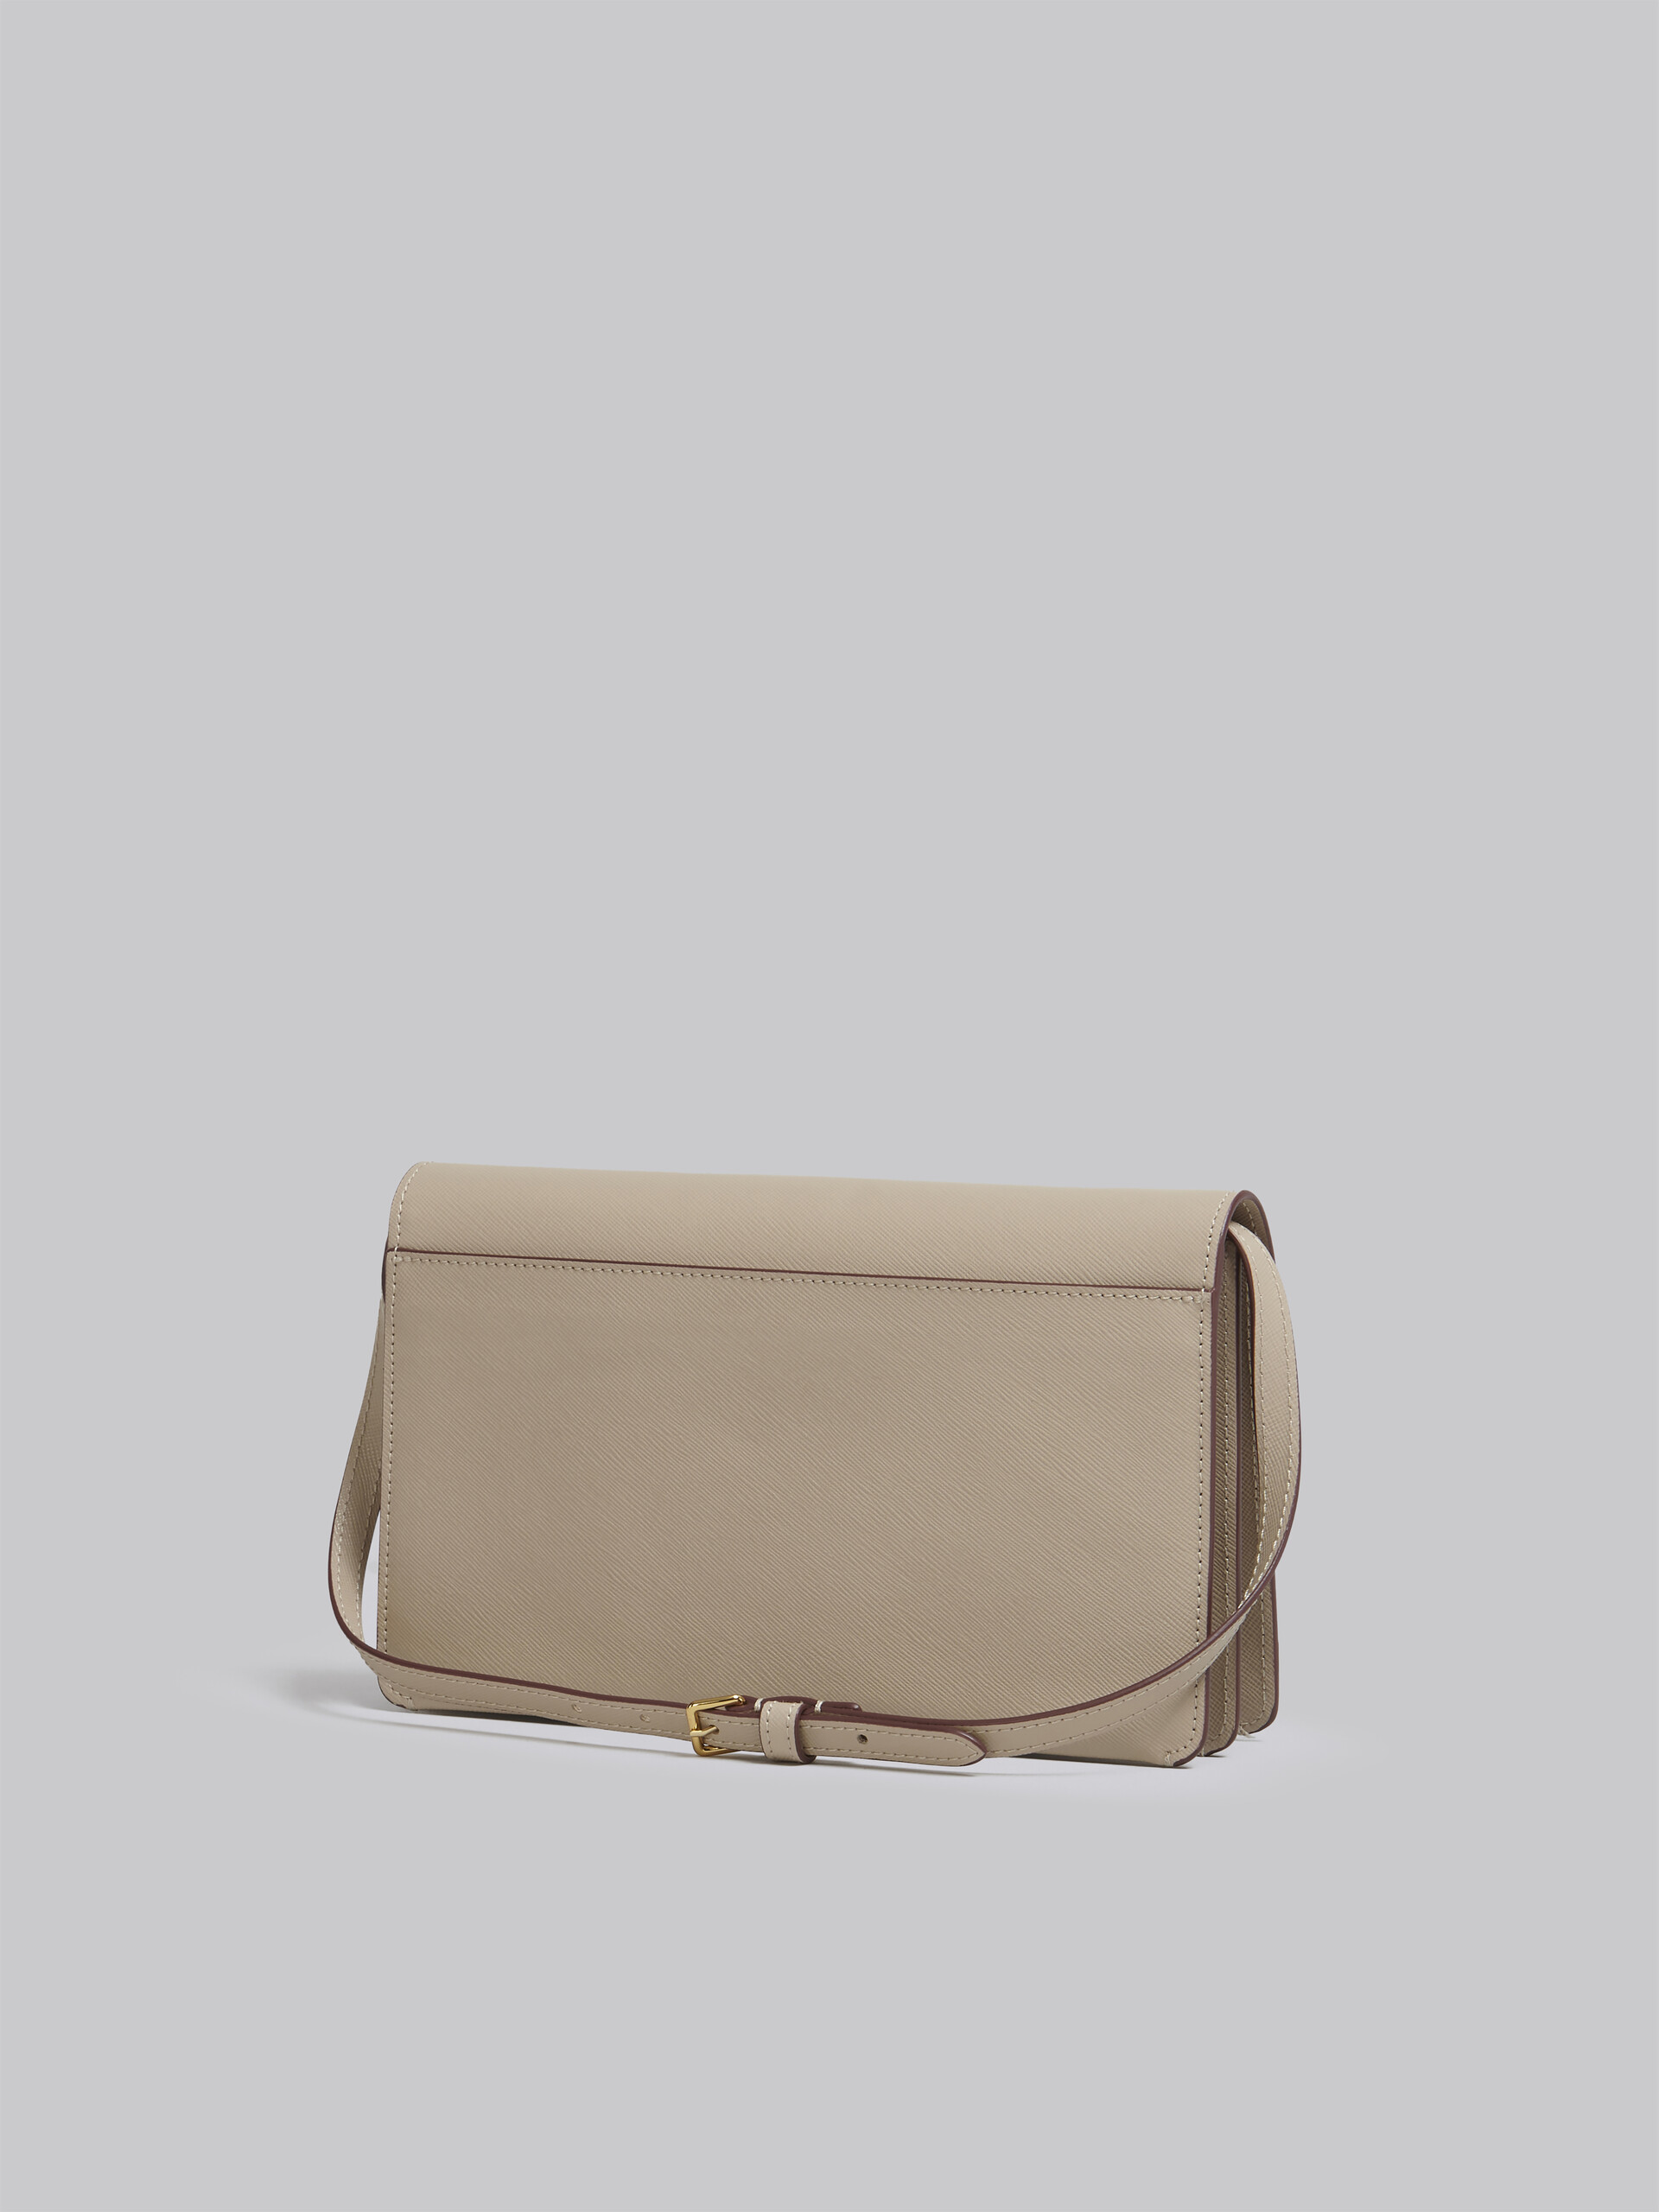 TRUNK clutch bag in beige saffiano leather - Pochettes - Image 2